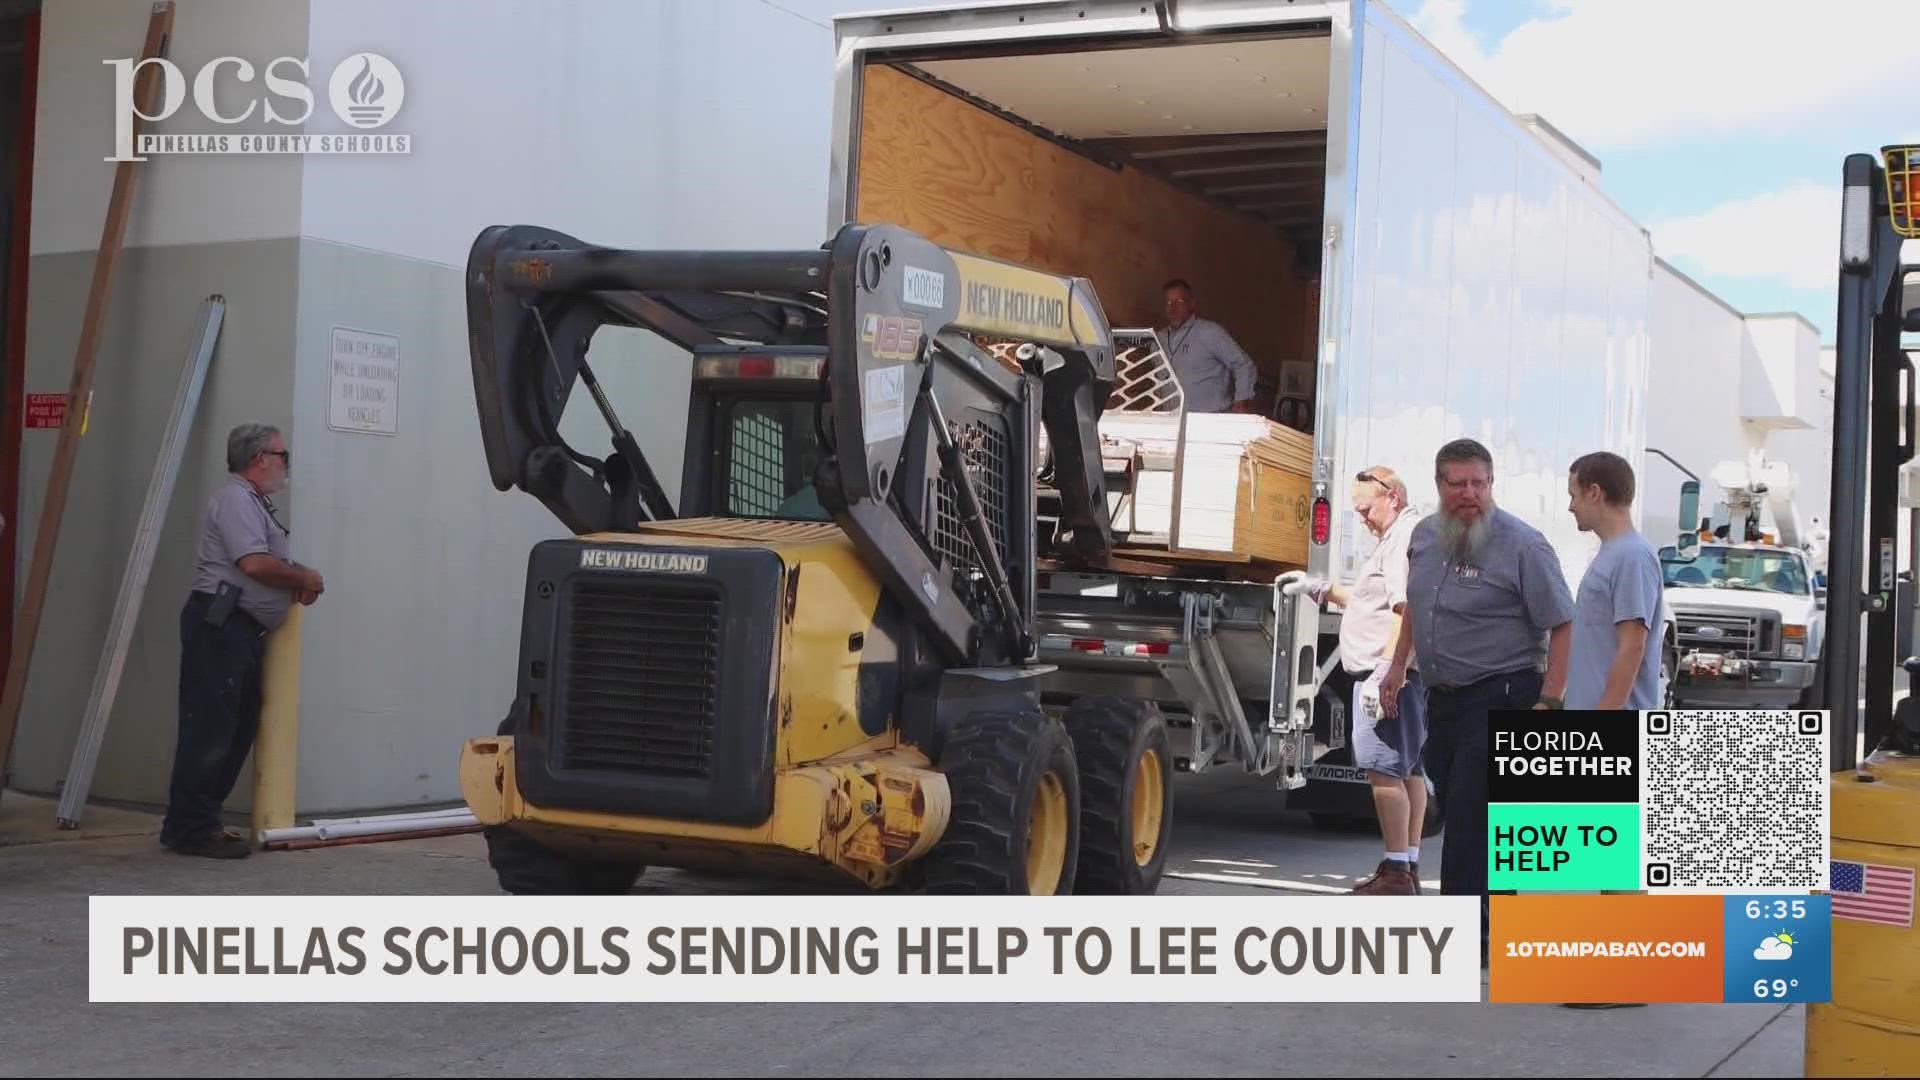 The crew will hand out meals and work to repair schools in Lee County to get them ready for reopening.